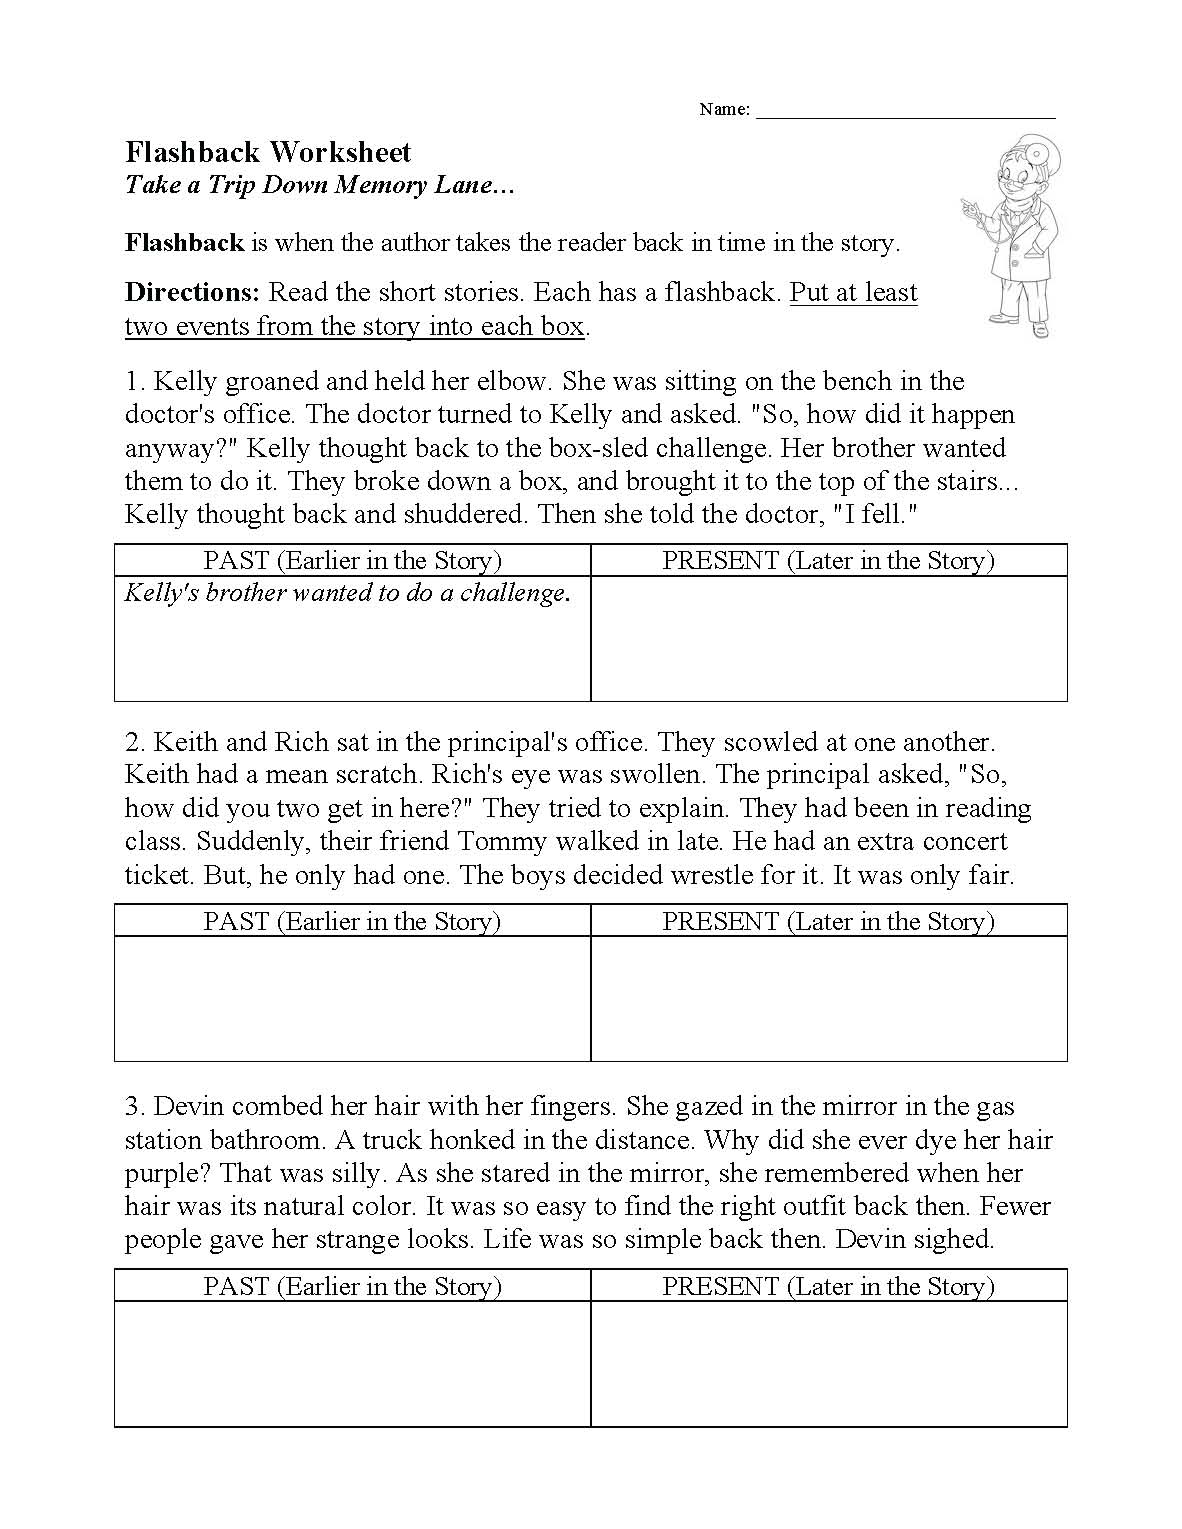 This is a preview image of our Flashback Worksheet. Click on it to enlarge or view the source file.